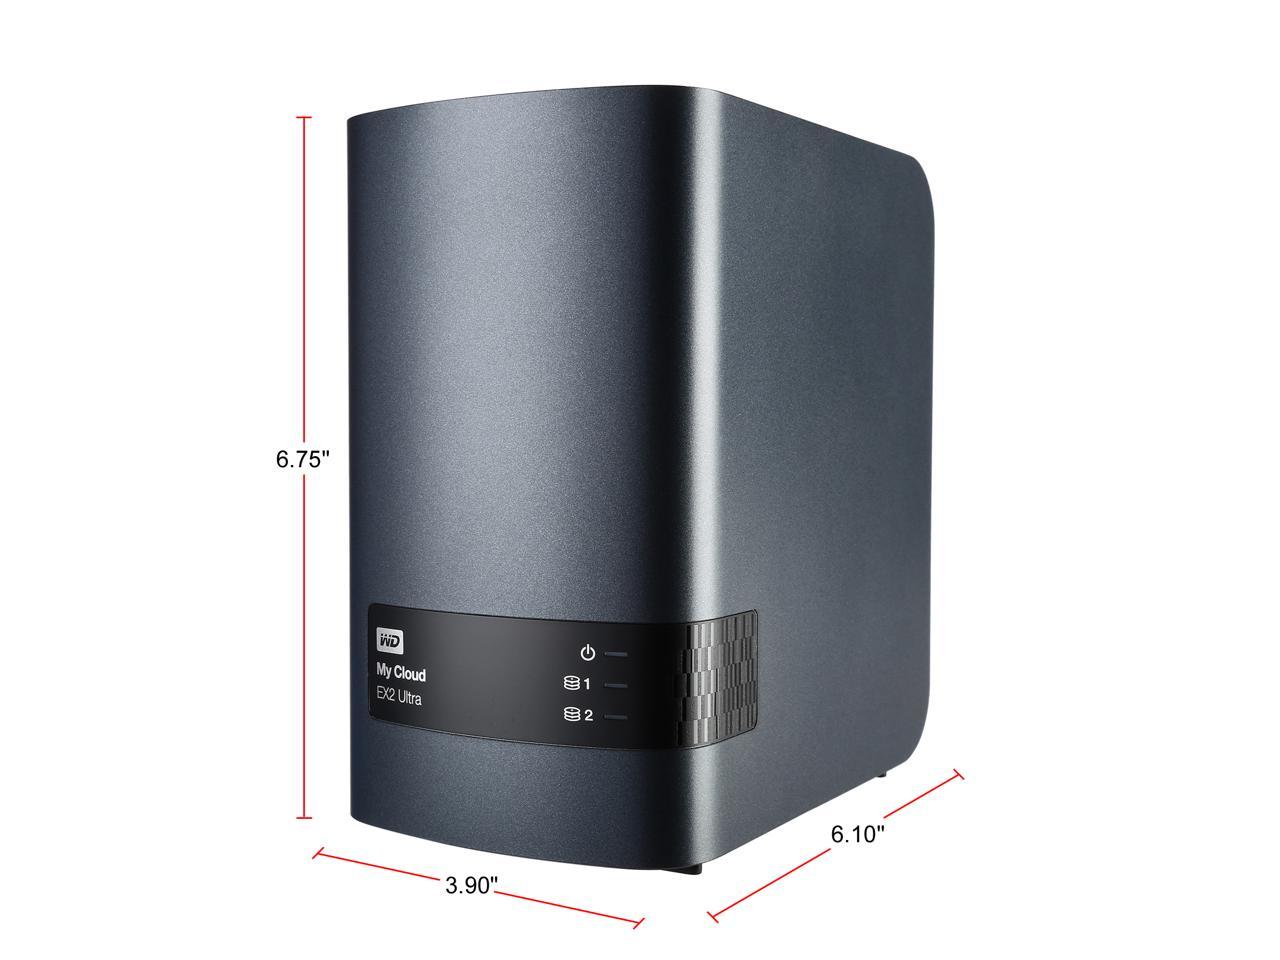 WD Diskless My Cloud EX2 Ultra NAS - Network Attached Storage - Dual-Core  Processor (WDBVBZ0000NCH-NESN)